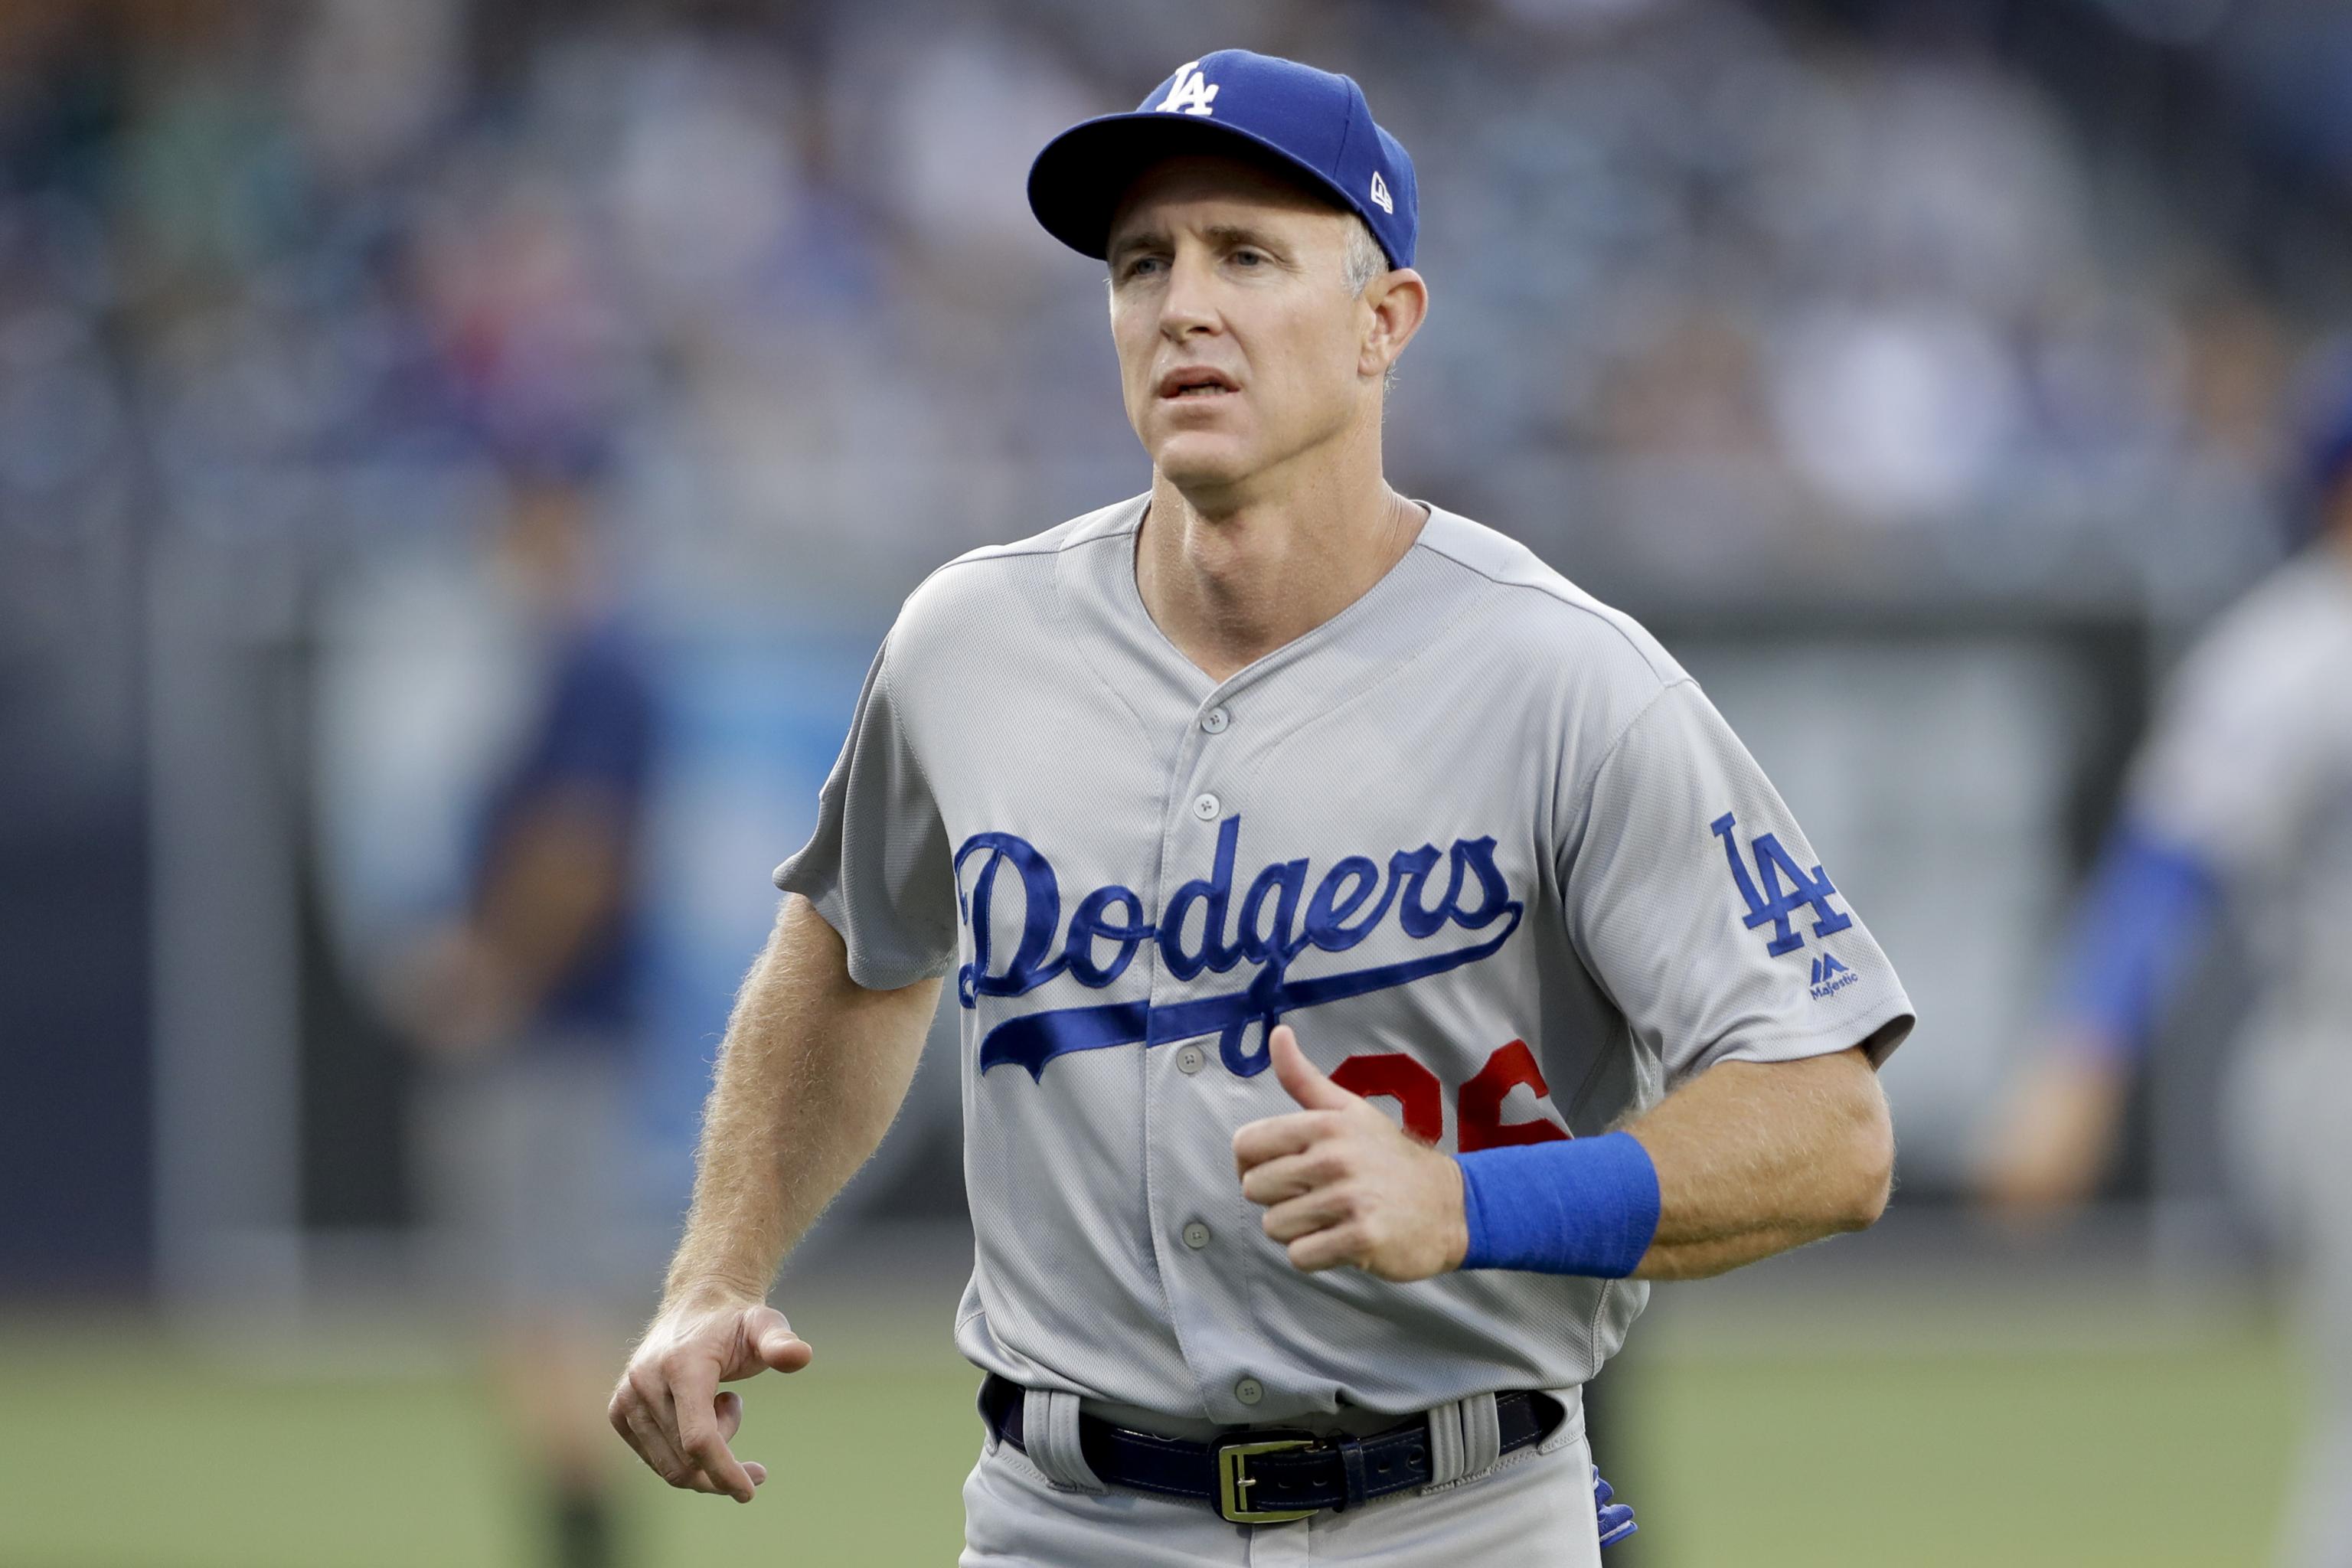 Chase Utley retires, ready for his next transition as a full-time